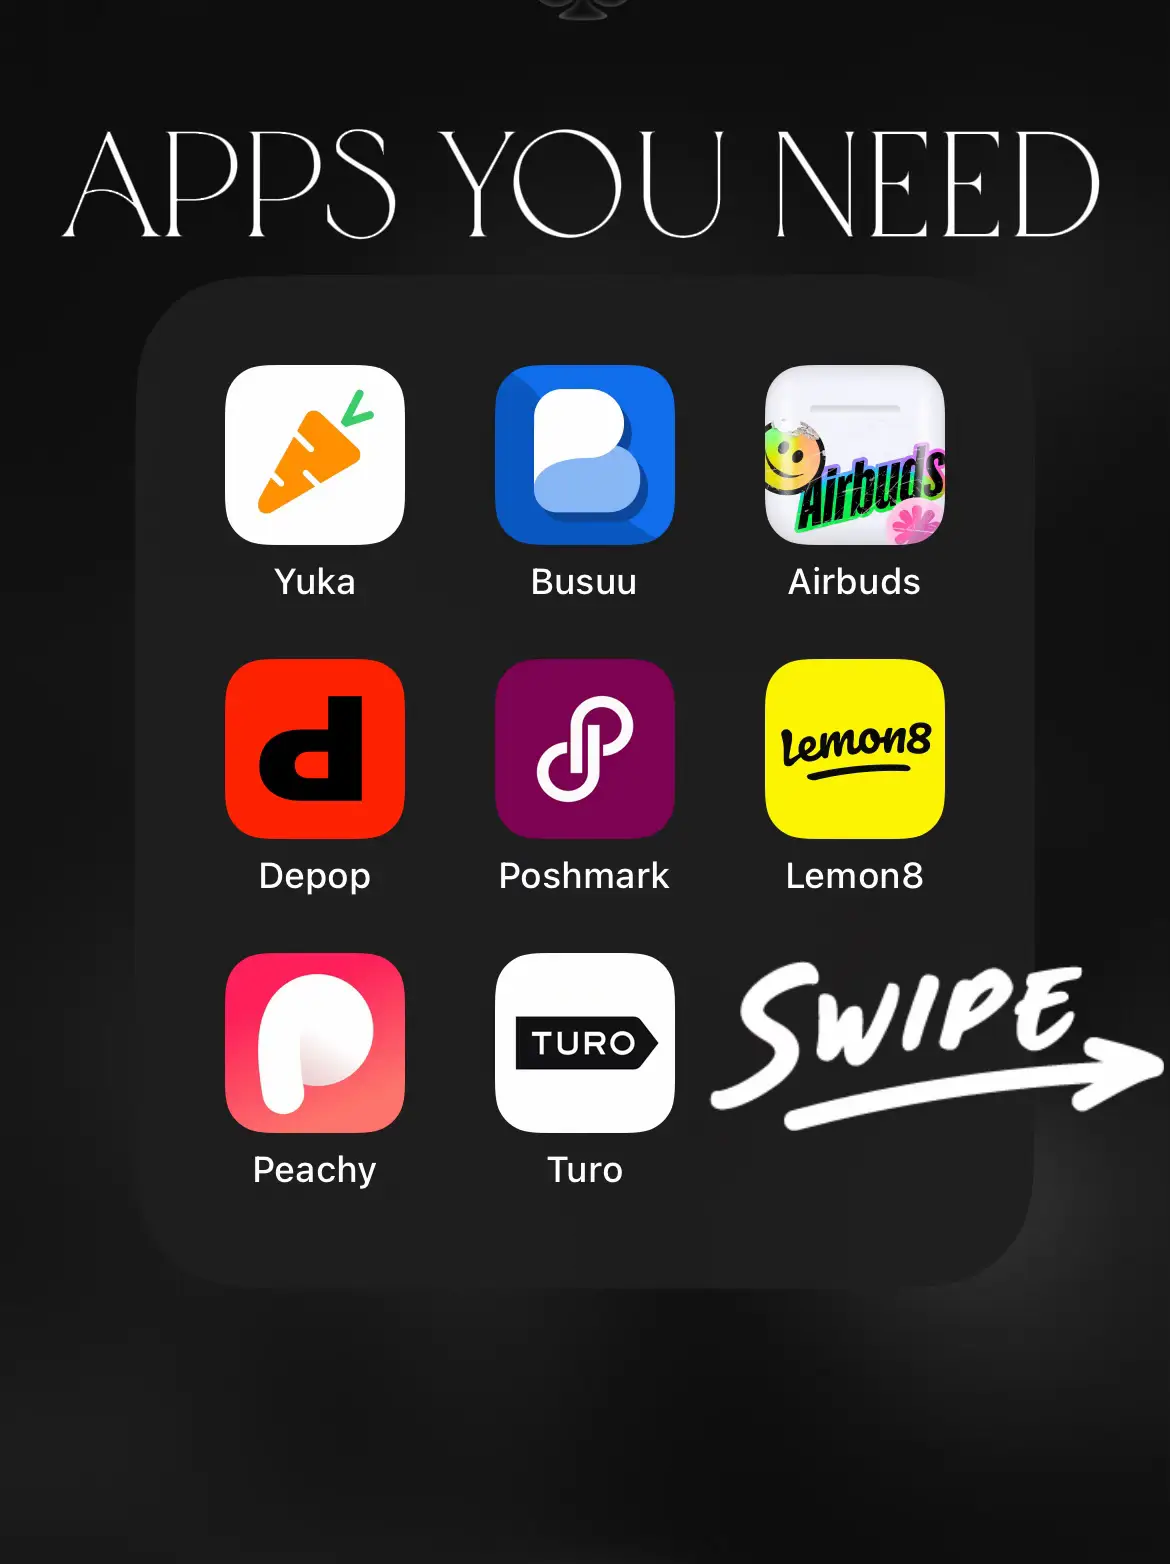  A list of apps with a description of each app.